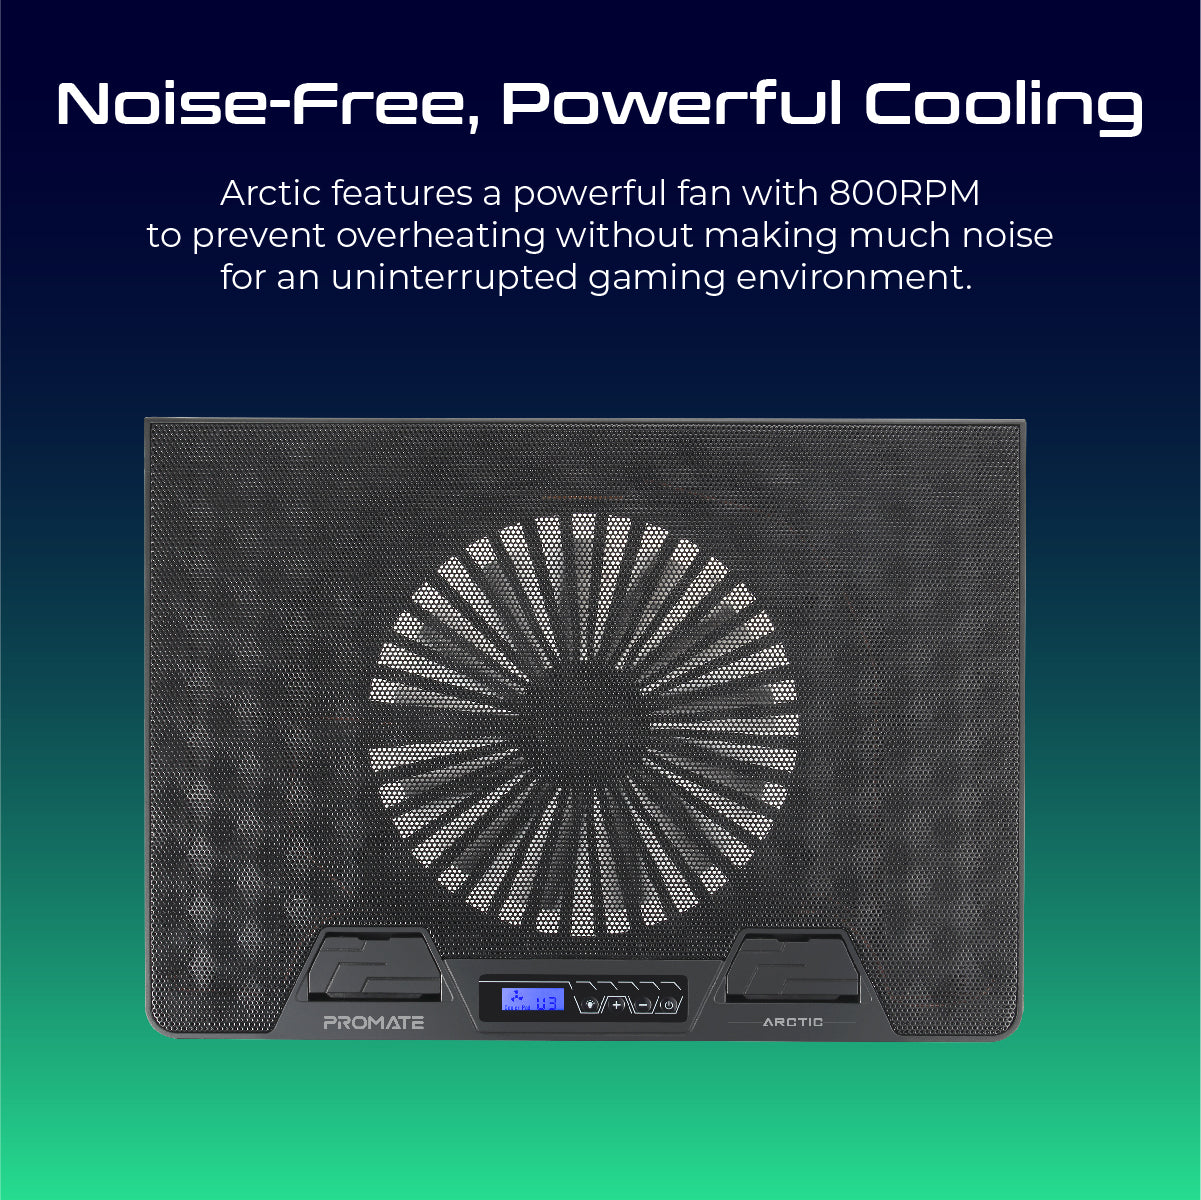 Promate Laptop Cooling Pad, Portable Gaming Laptop Cooling Stand with Ventilated Metal Mesh Surface, Adjustable Height, LCD Display Screen, Built-In Controls, Smart RGB LED Lights and Dual USB Ports for Laptops up to 17 Inches, Arctic